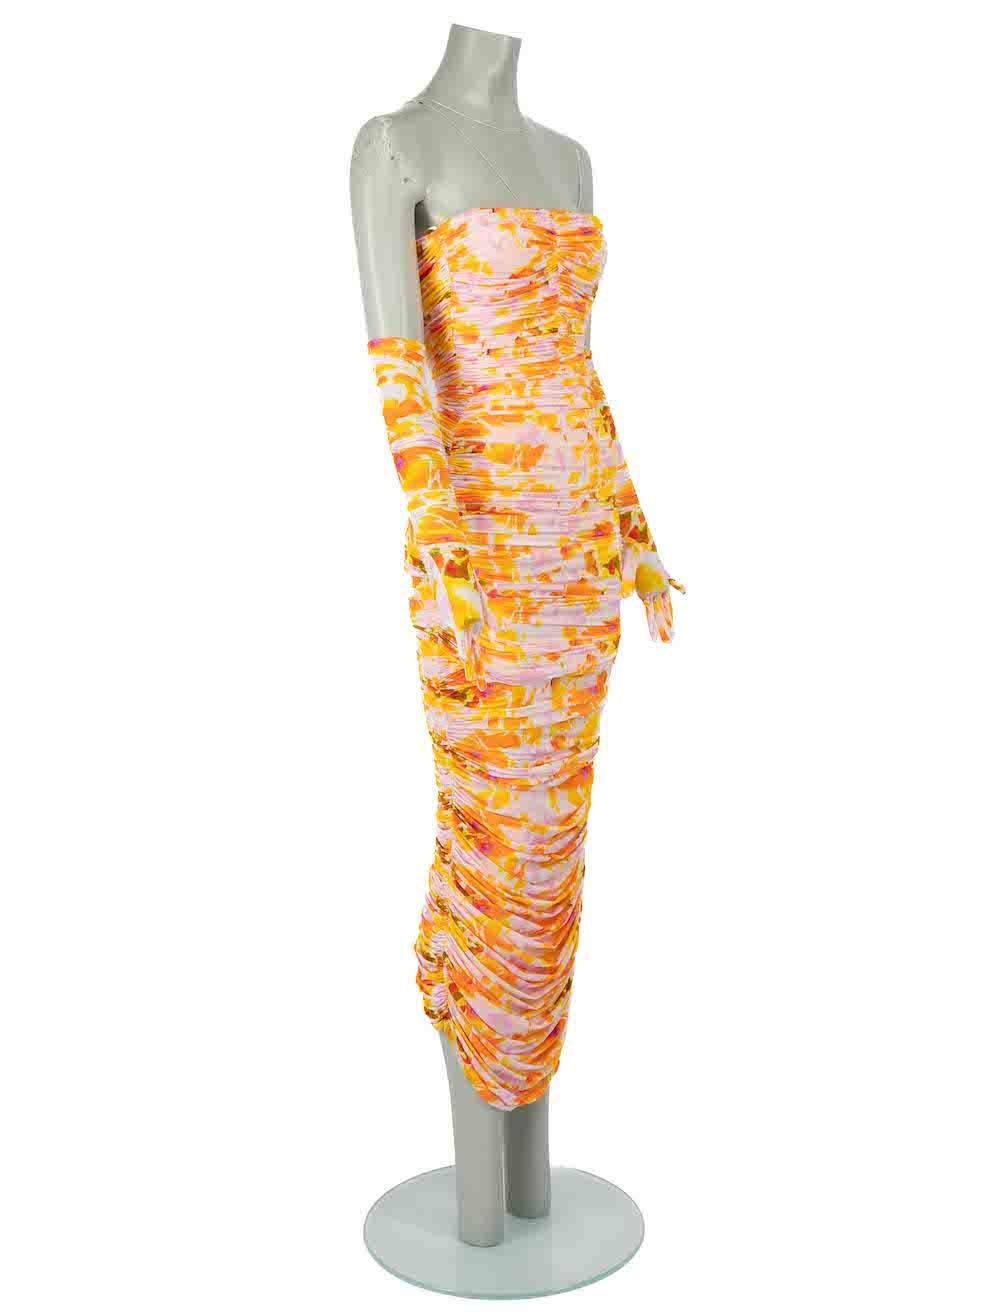 CONDITION is Never worn, with tags. No visible wear to dress is evident on this new Alex Perry designer resale item.
 
 Details
 Parton
 Multicolour
 Synthetic
 Dress with gloves
 Tie dye pattern
 Strapless
 Ruched
 Figure hugging fit
 Midi
 Boned